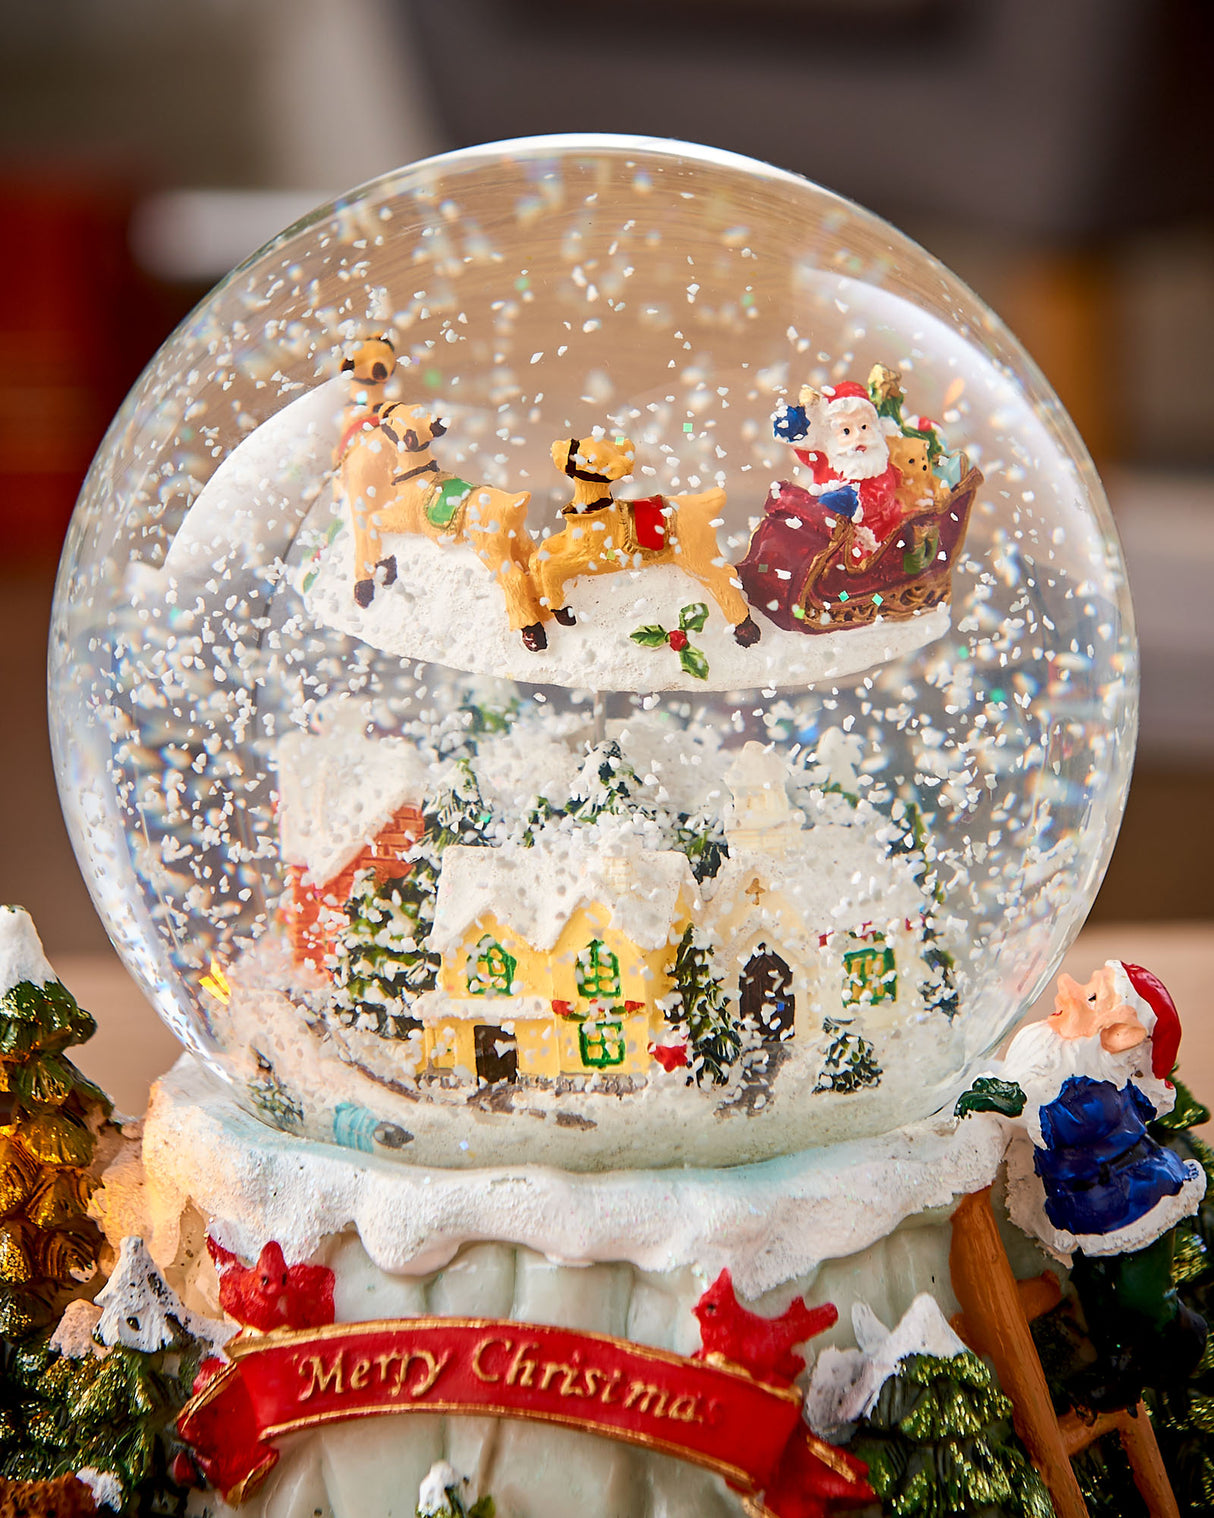 Animated Village and Train Musical Snow Globe, 20 cm